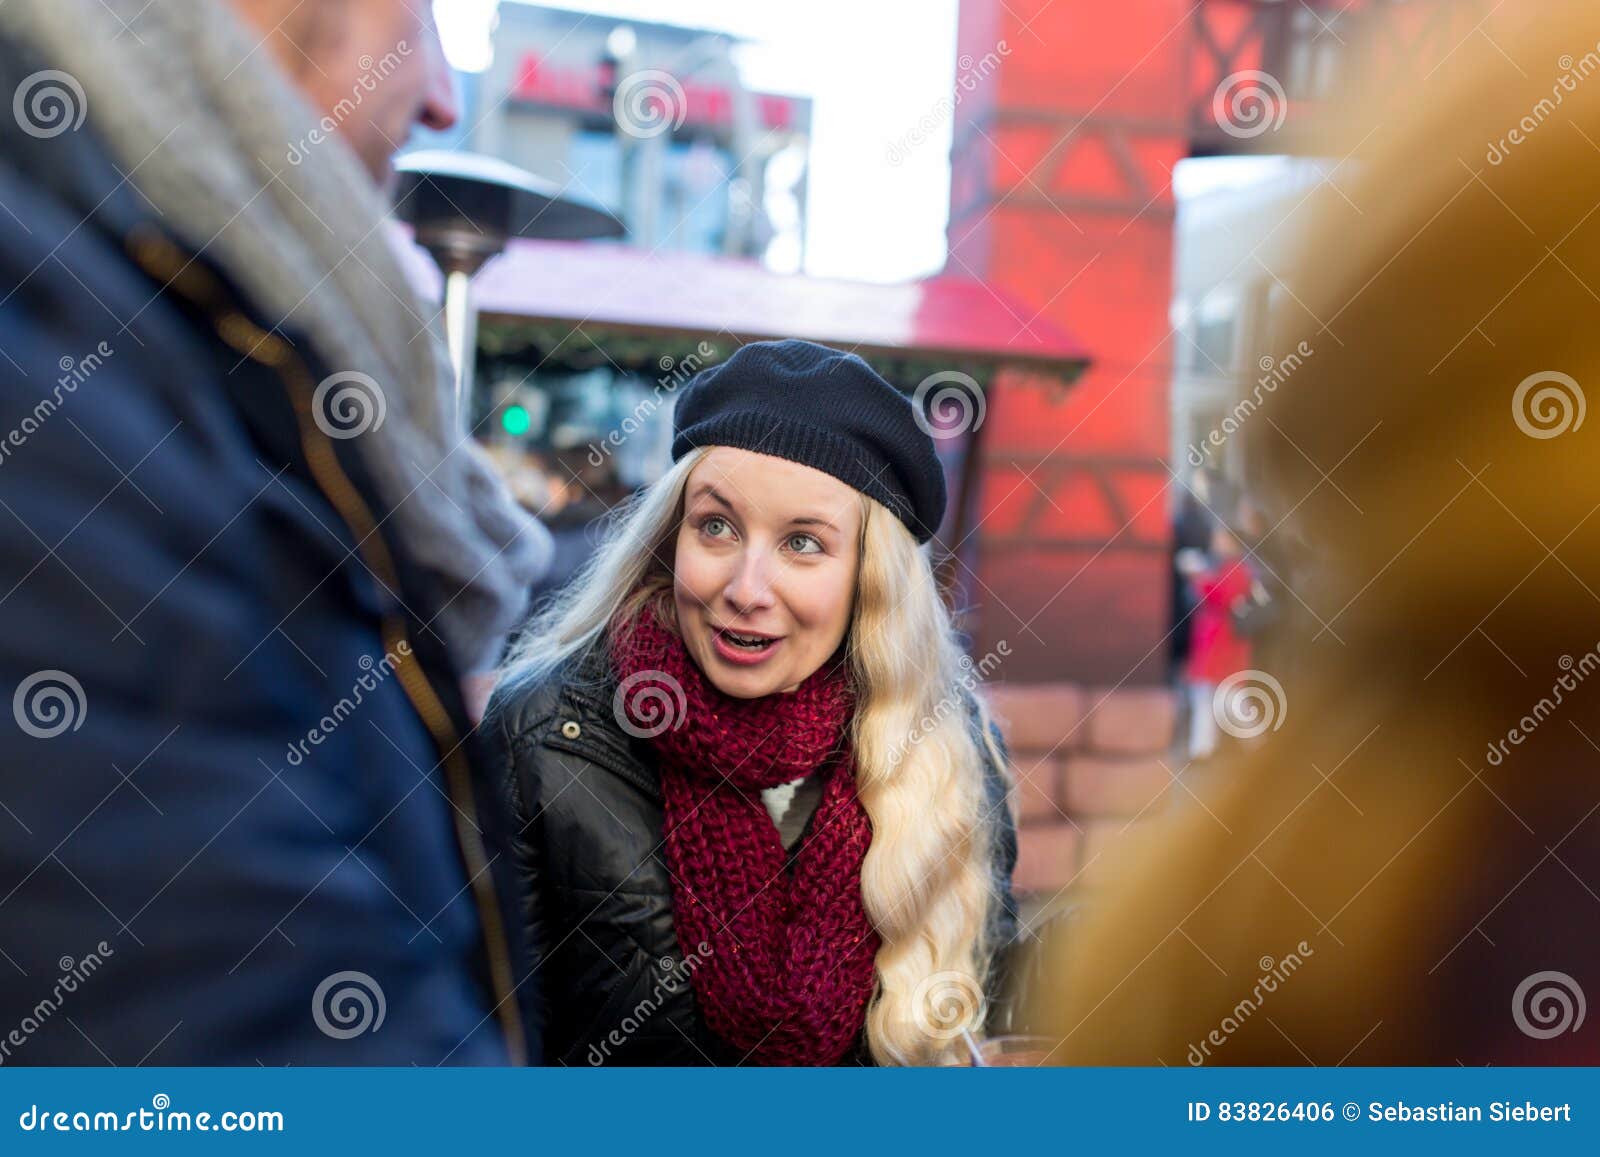 Young Woman in the Bathroom Looks into a Mirror Stock Photo - Image of ...